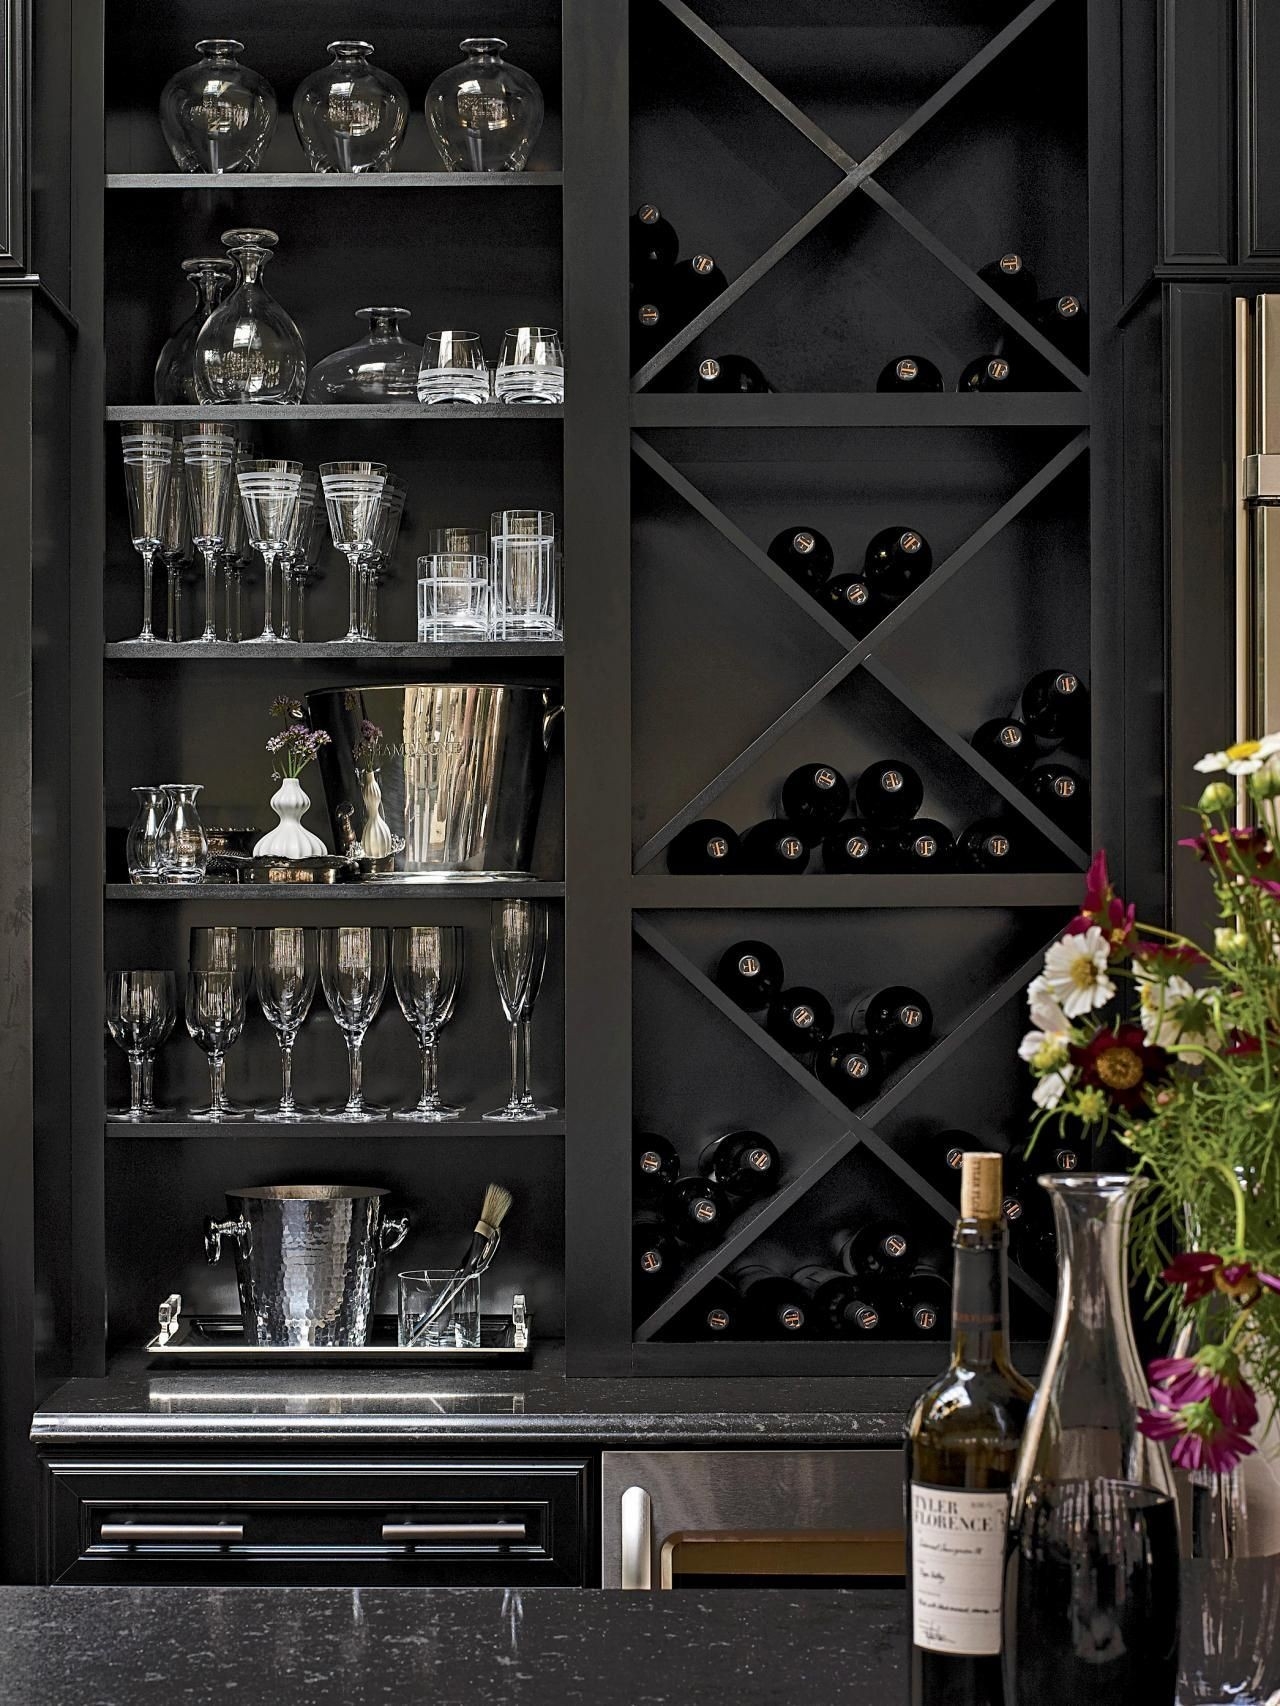 Displays for Wine Bottle & Glasses choose 2-glass or 4-glass